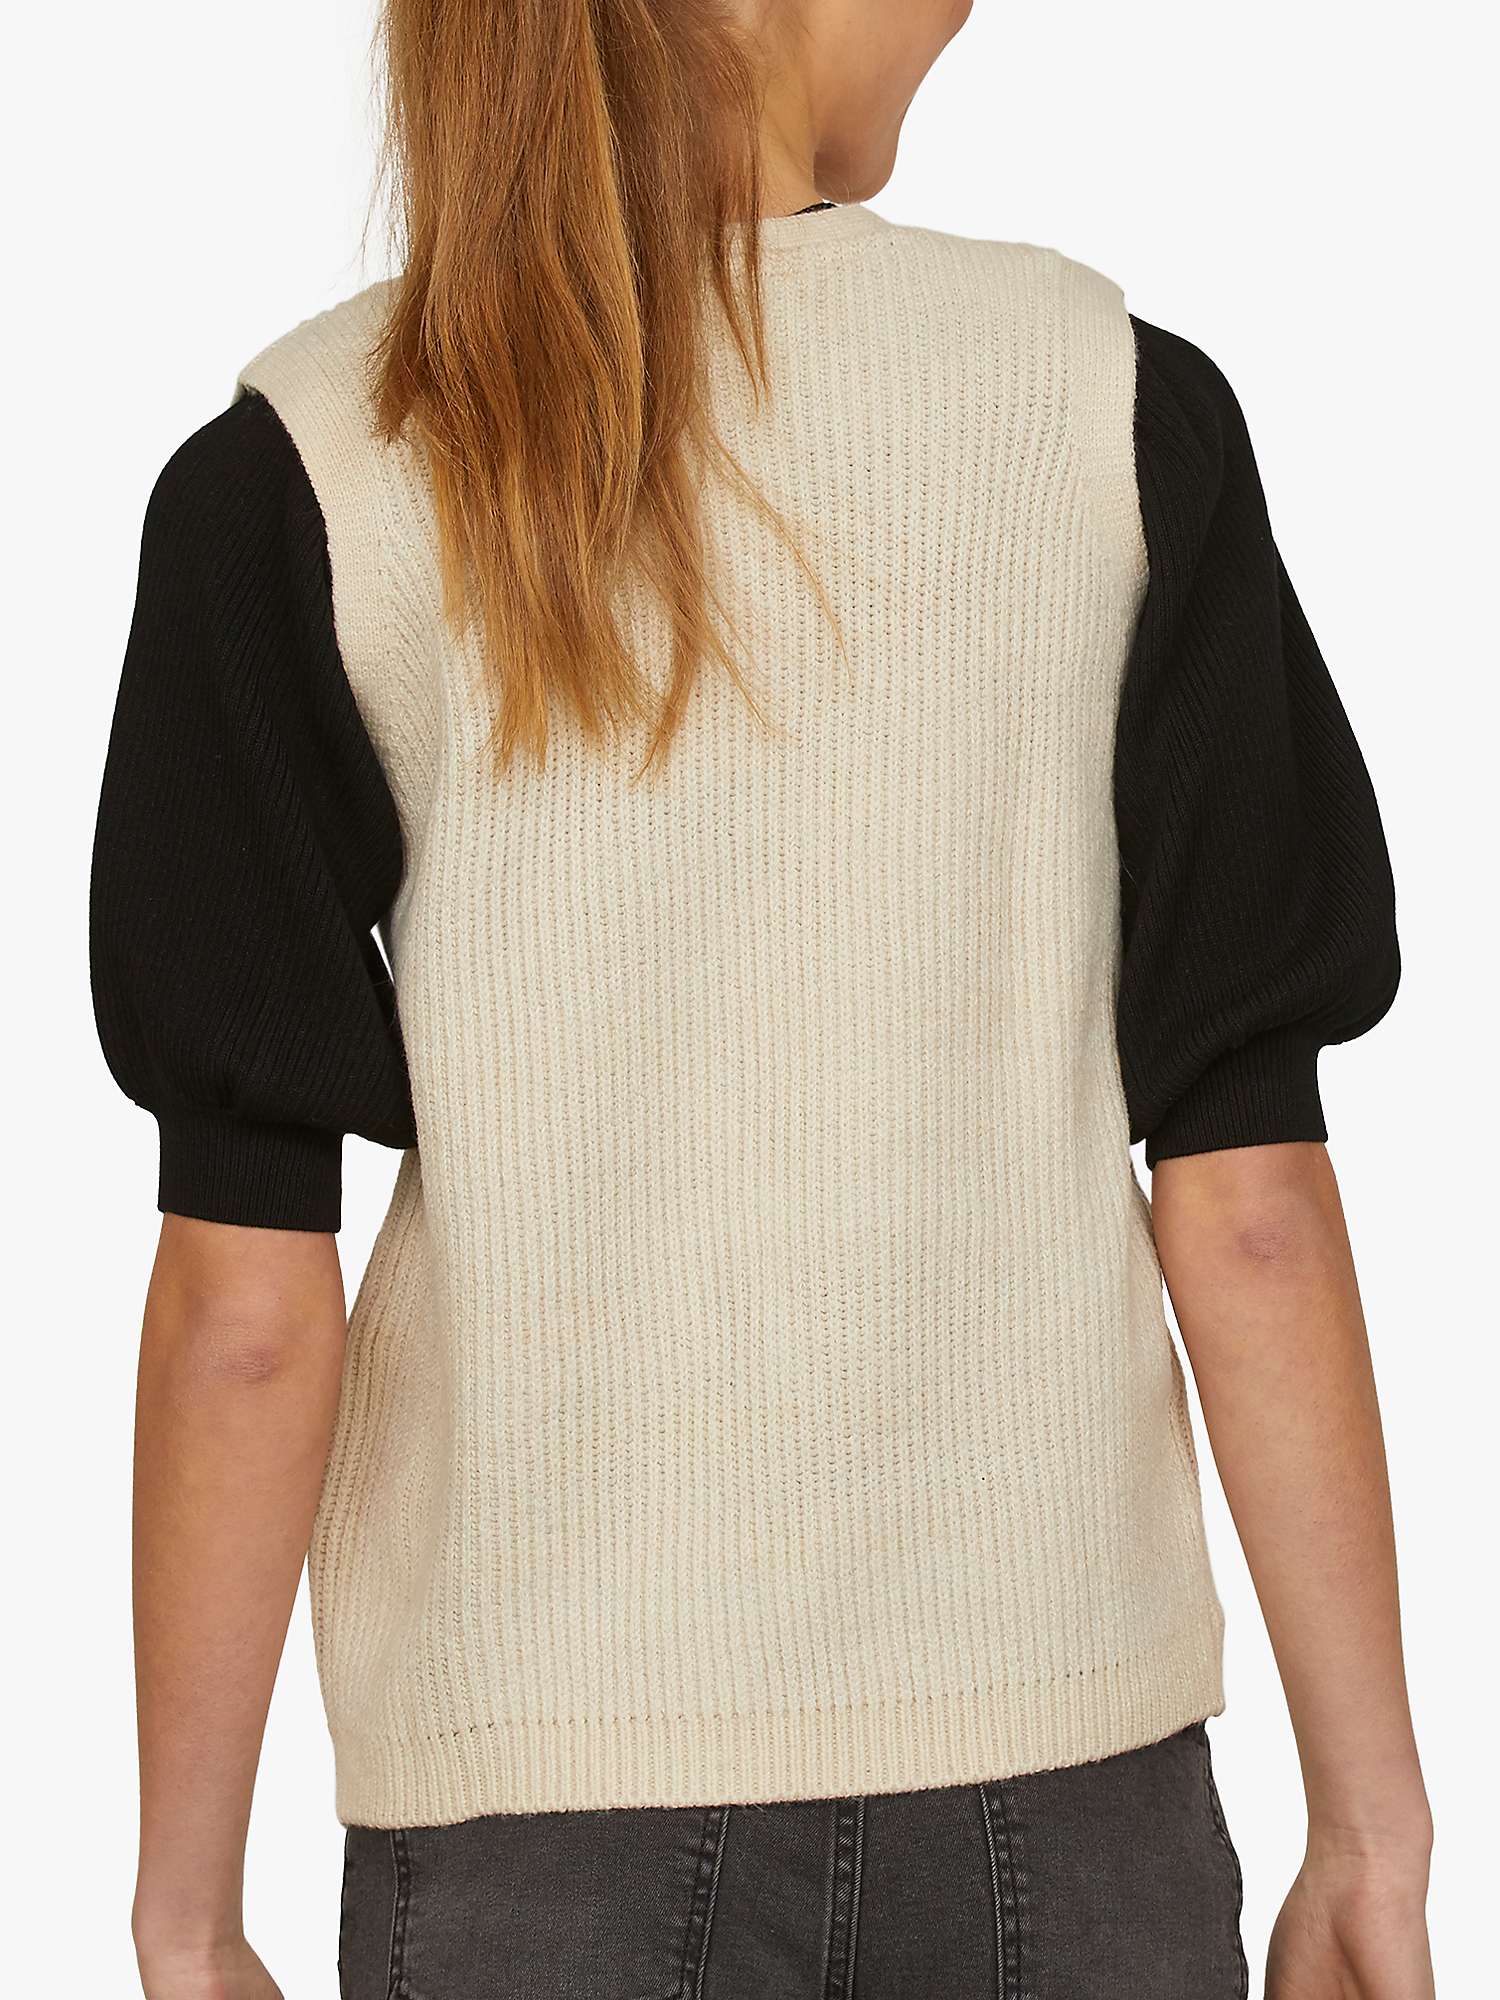 Buy Sisters Point Hebea Soft Knitted Waistcoat, Beige Online at johnlewis.com